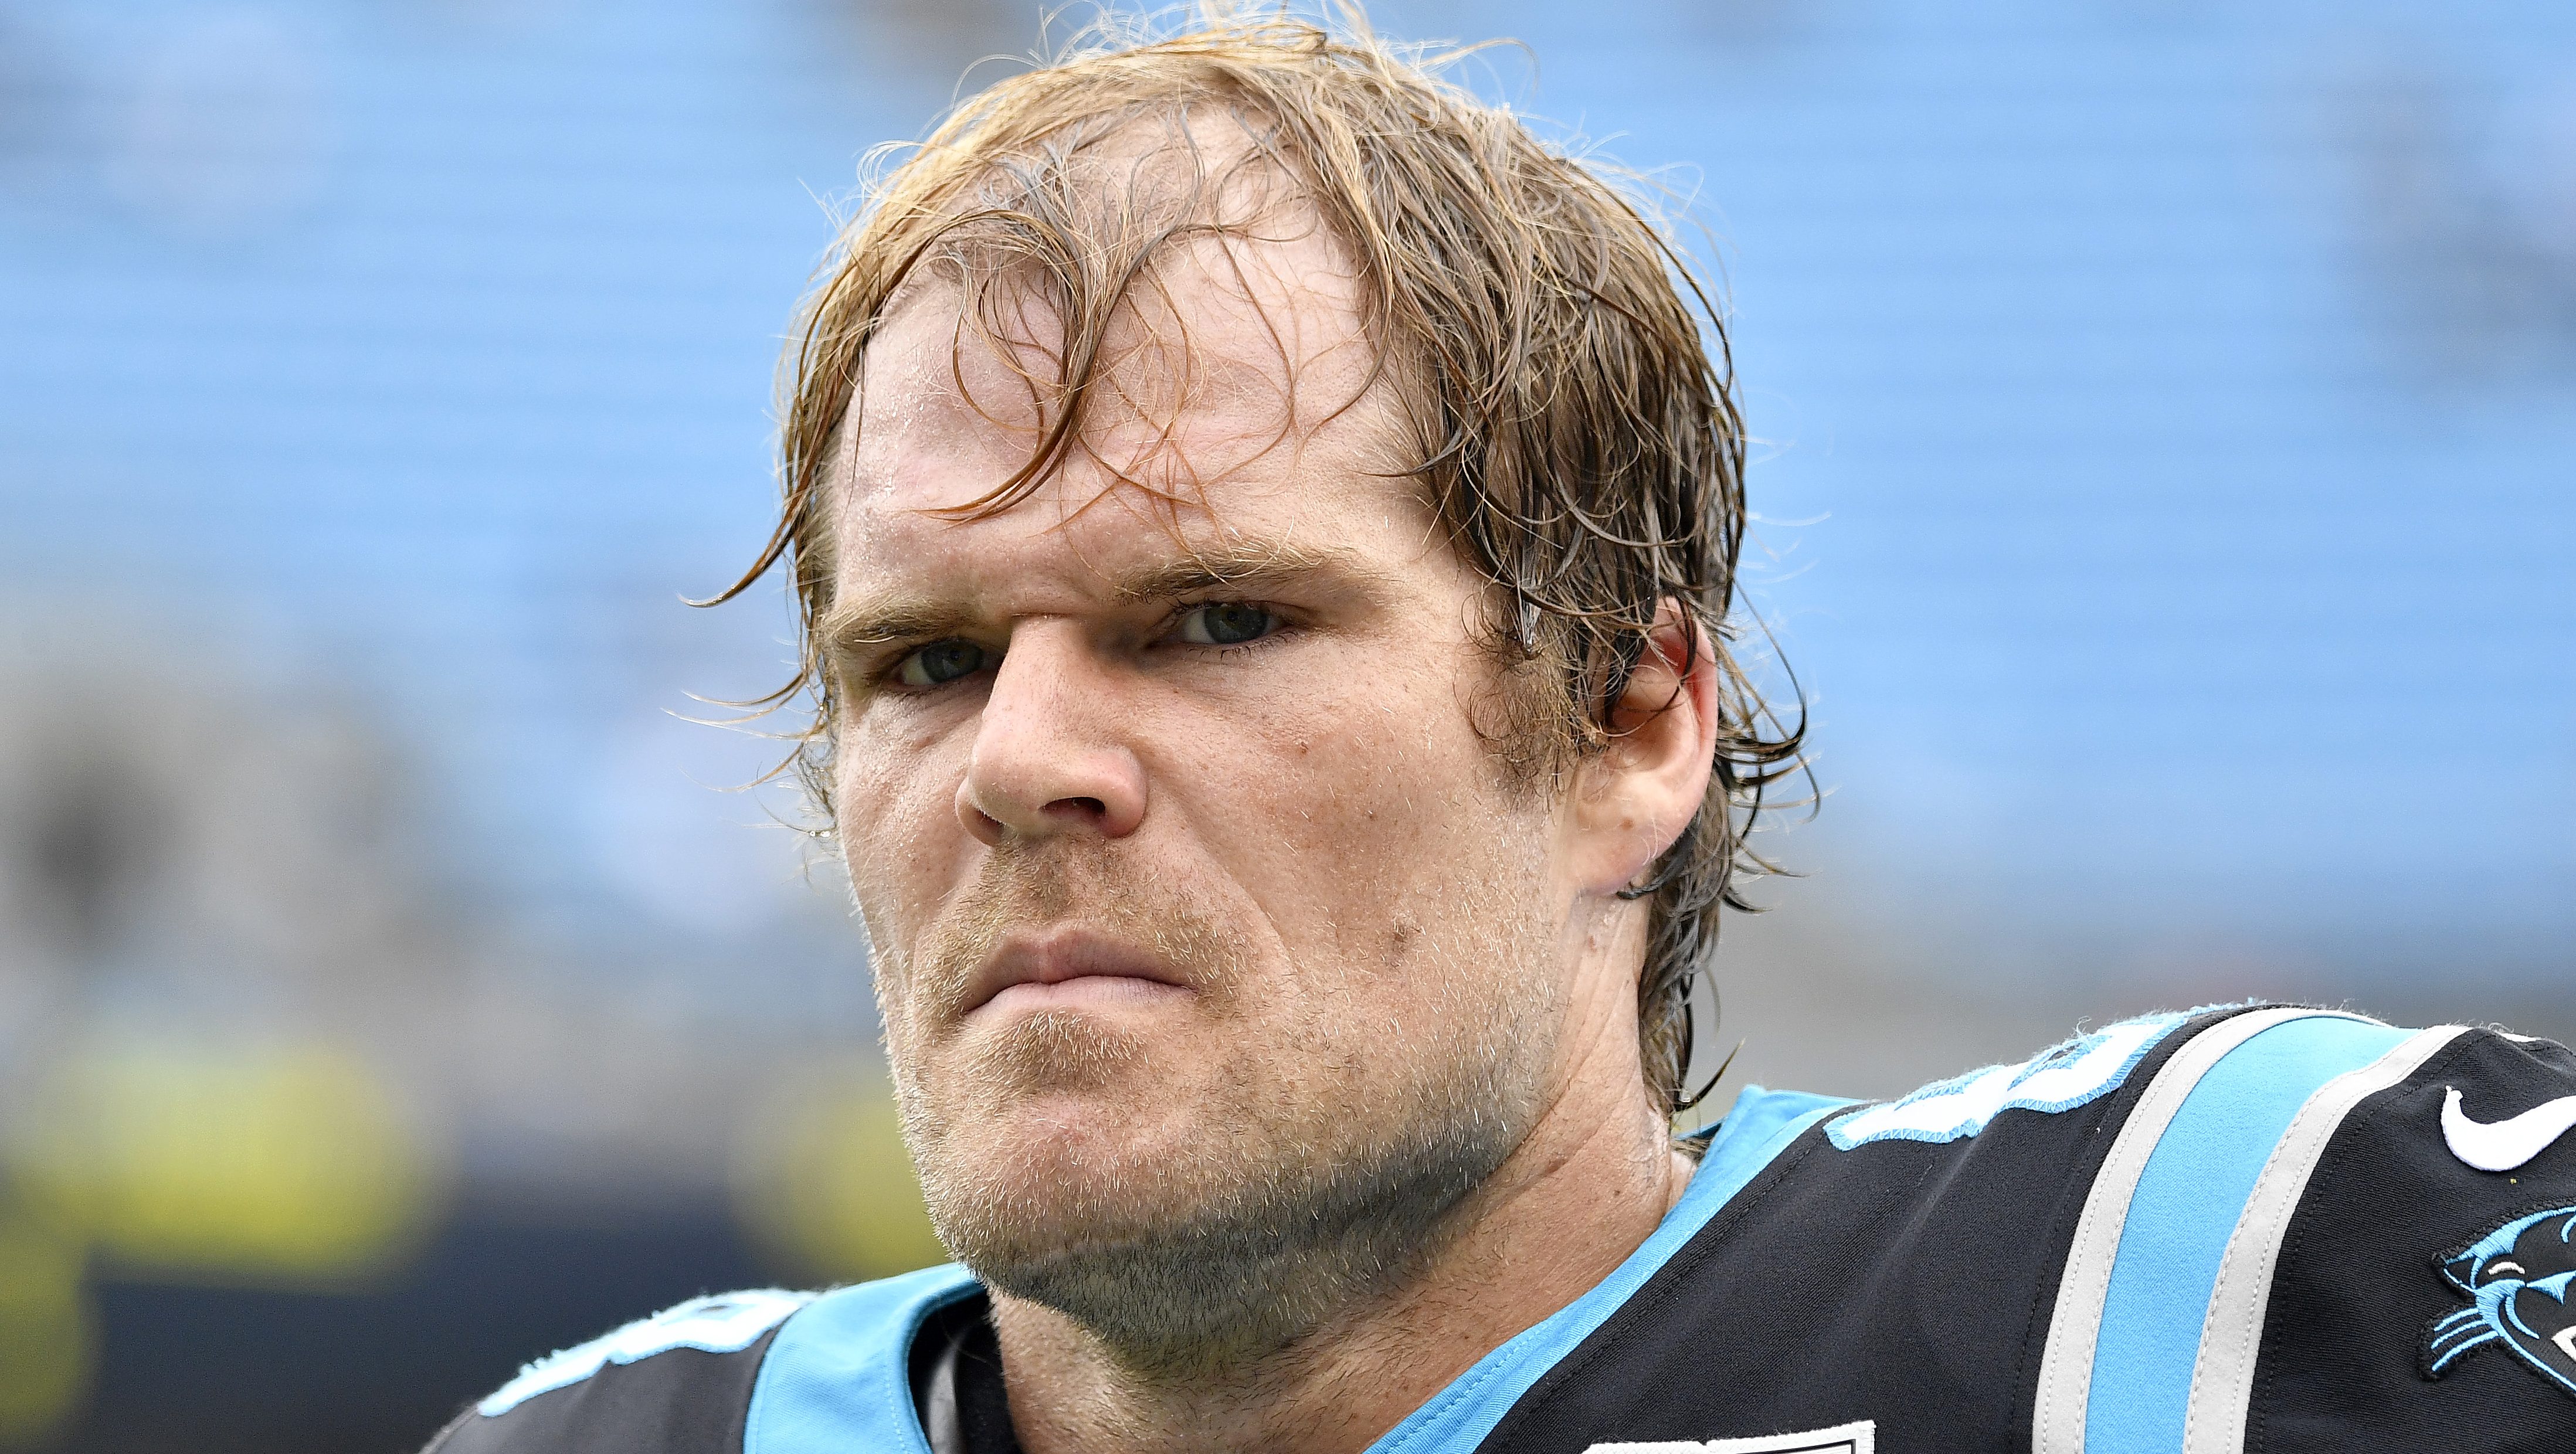 Greg Olsen Has Perfect Response to Signing With Seahawks